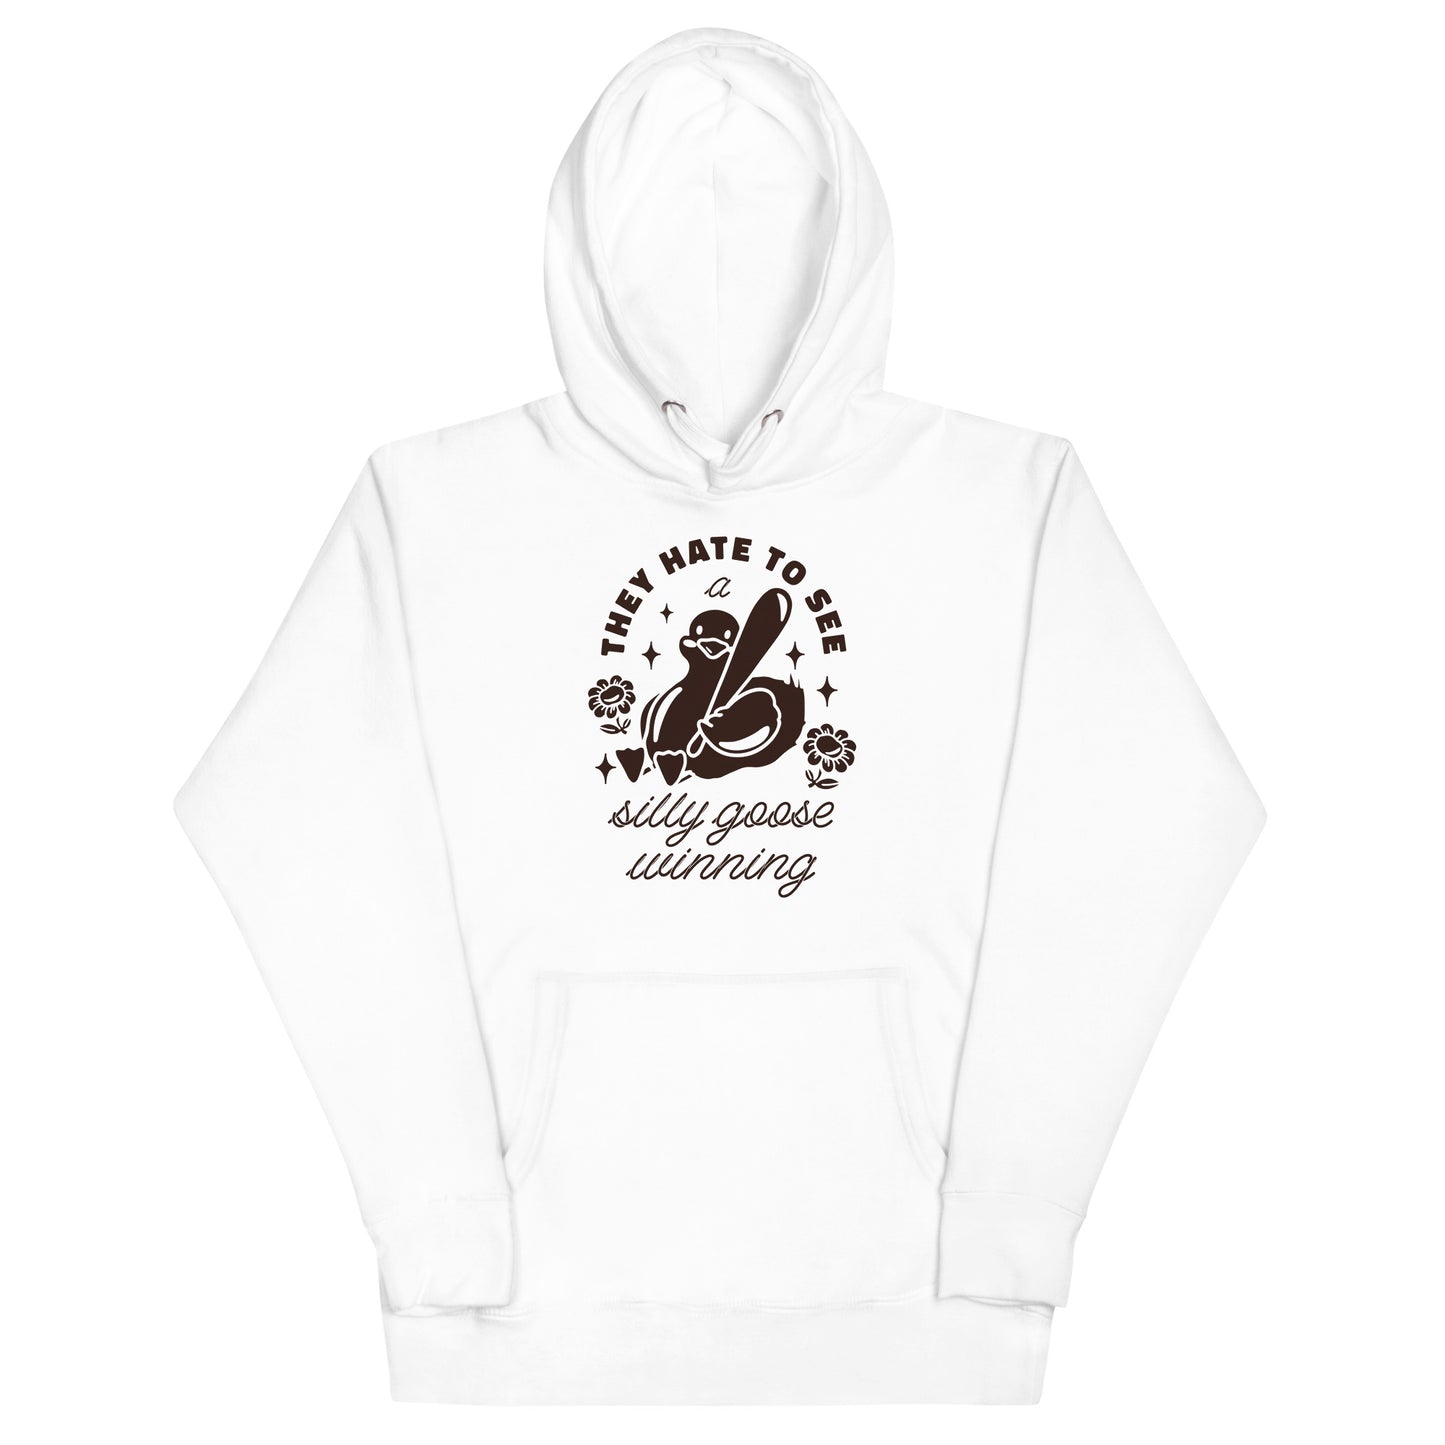 They Hate To See a Silly Goose Winning Unisex Hoodie